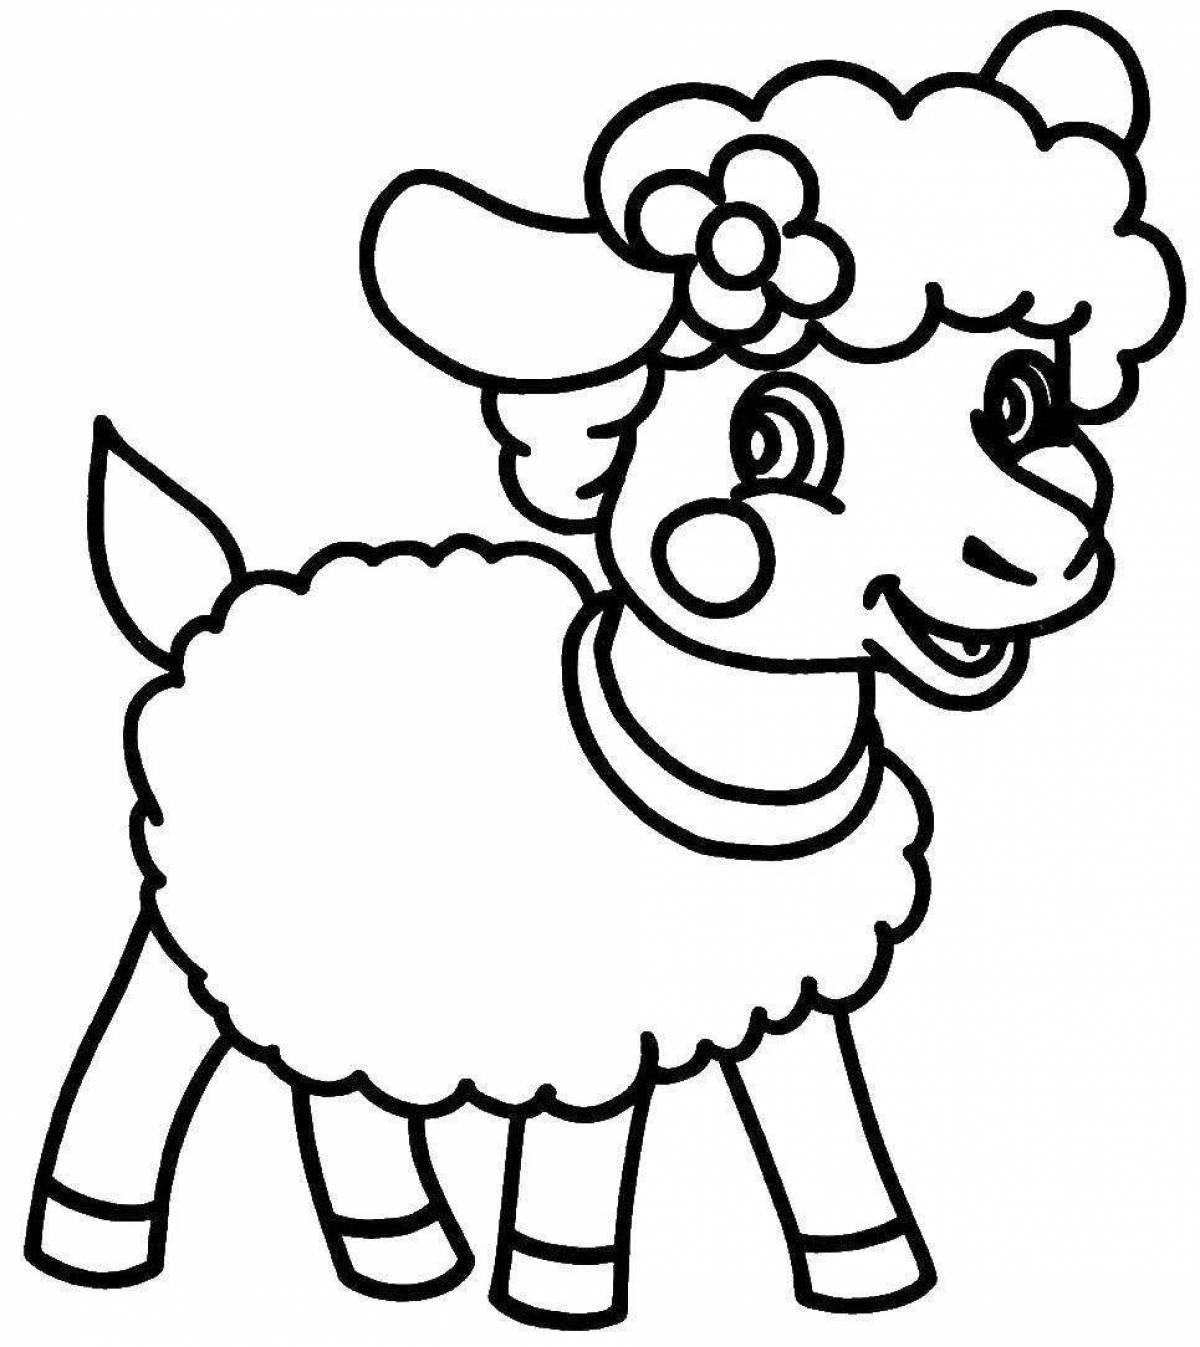 Fun coloring sheep for children 2-3 years old